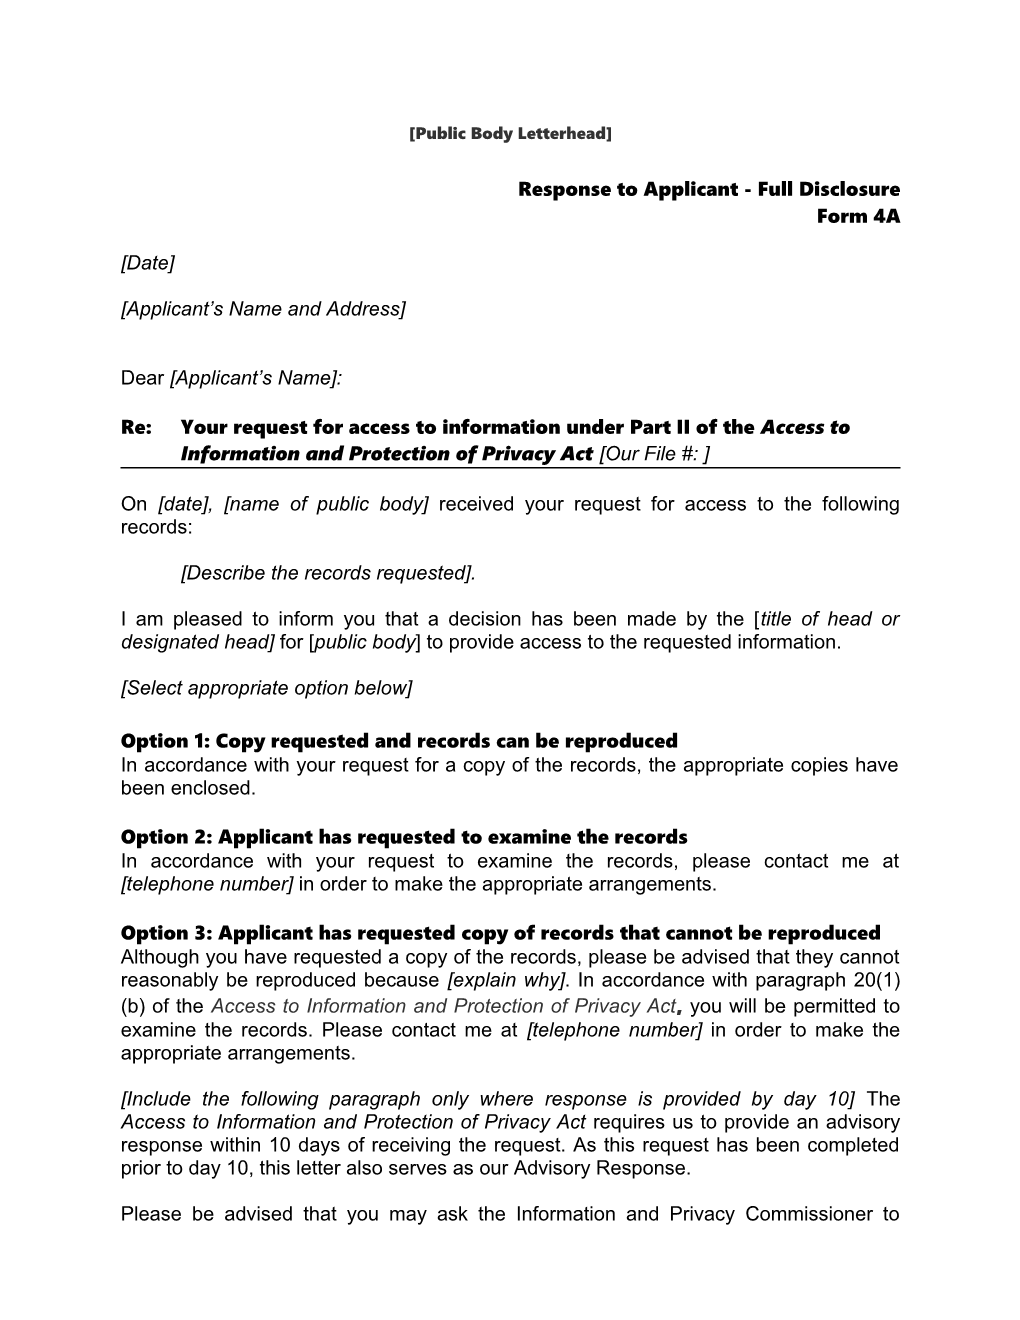 Form 4A - Response to Applicant - Full Disclosure